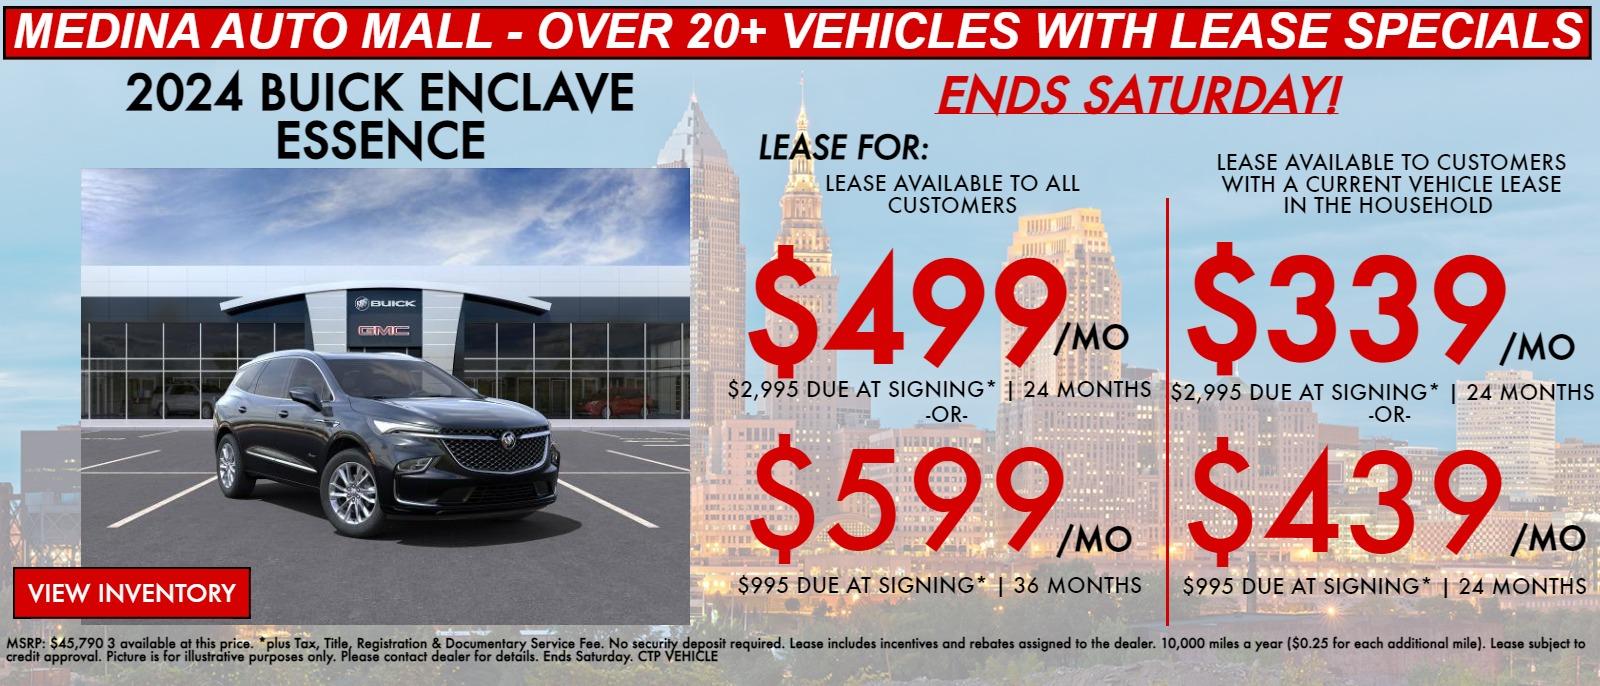 Enclave lease special deals in Medina, OH